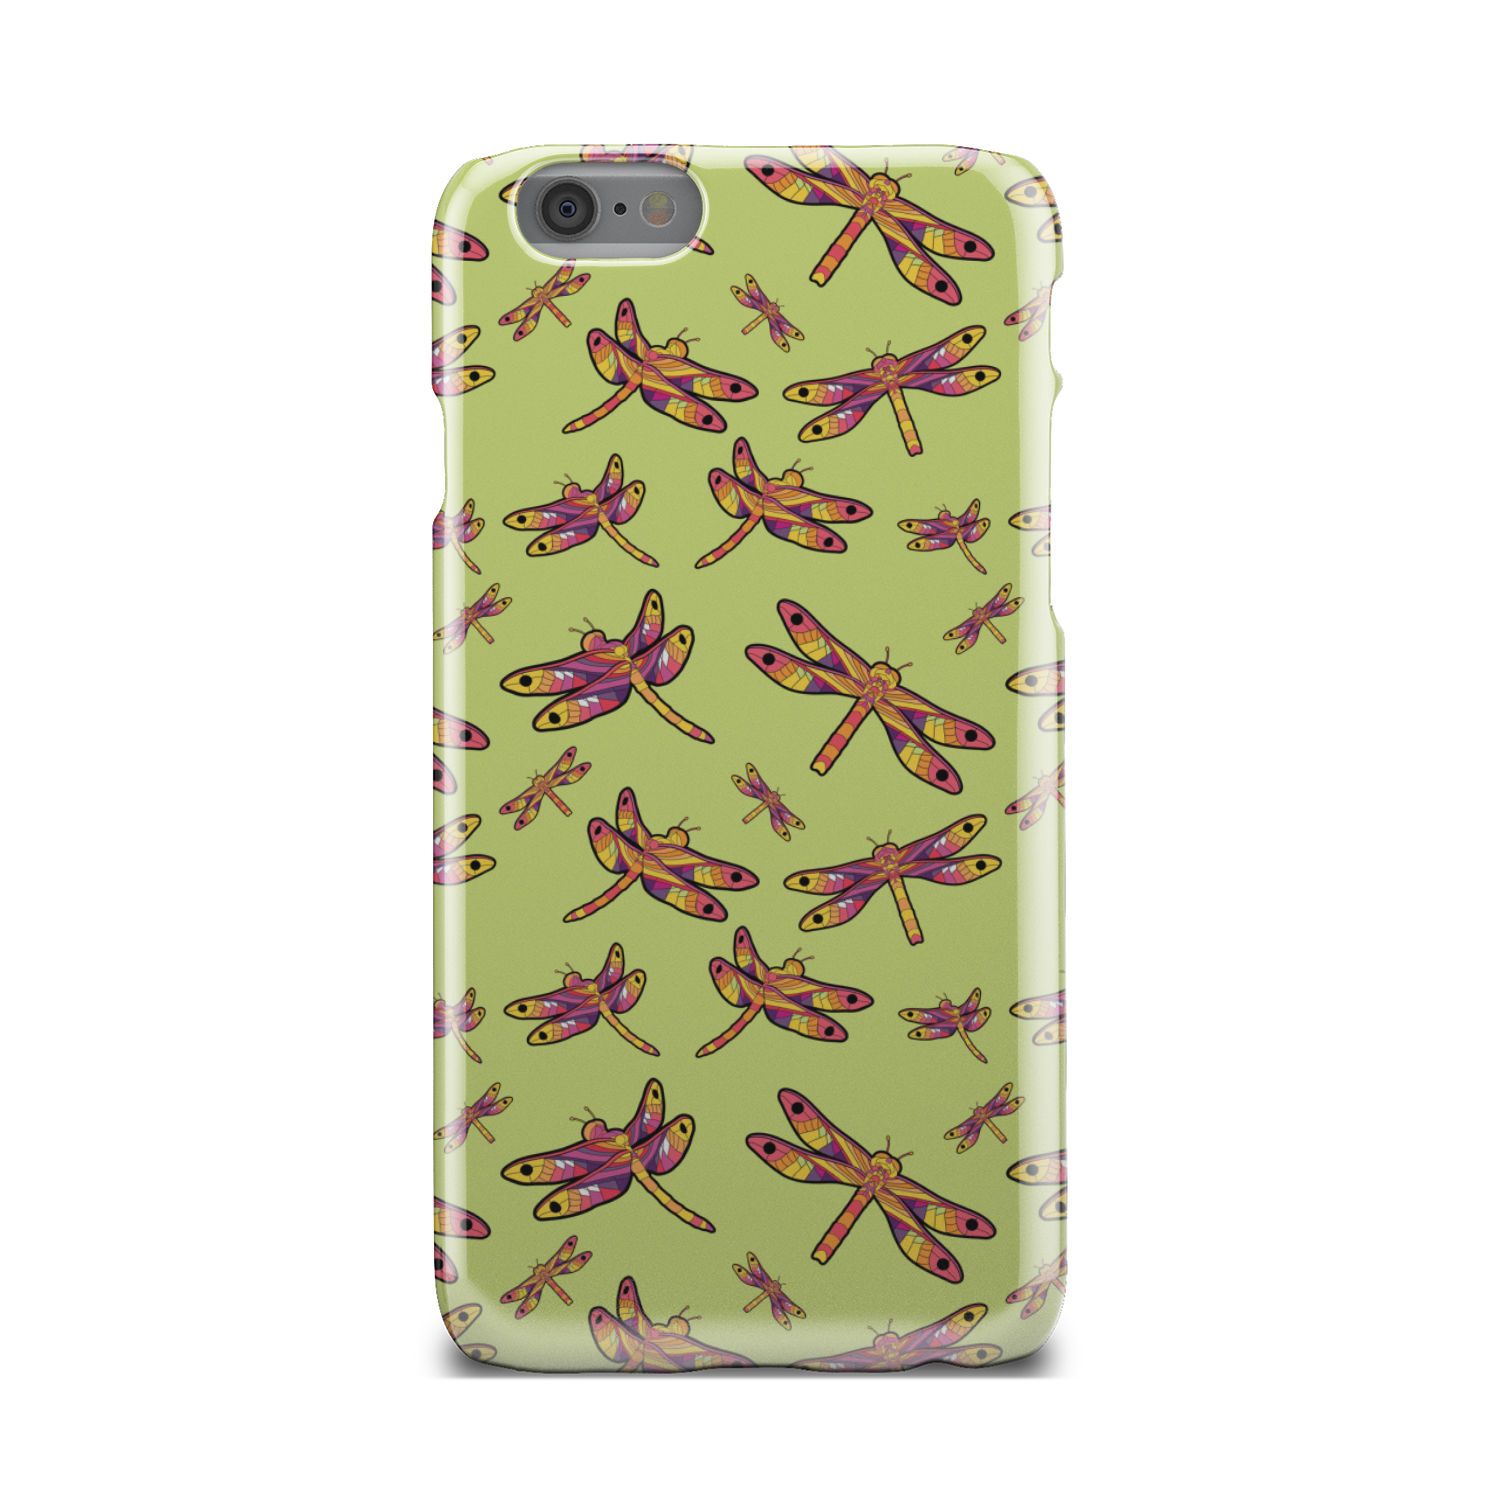 Gathering Lime Phone Case Phone Case wc-fulfillment iPhone 6s 